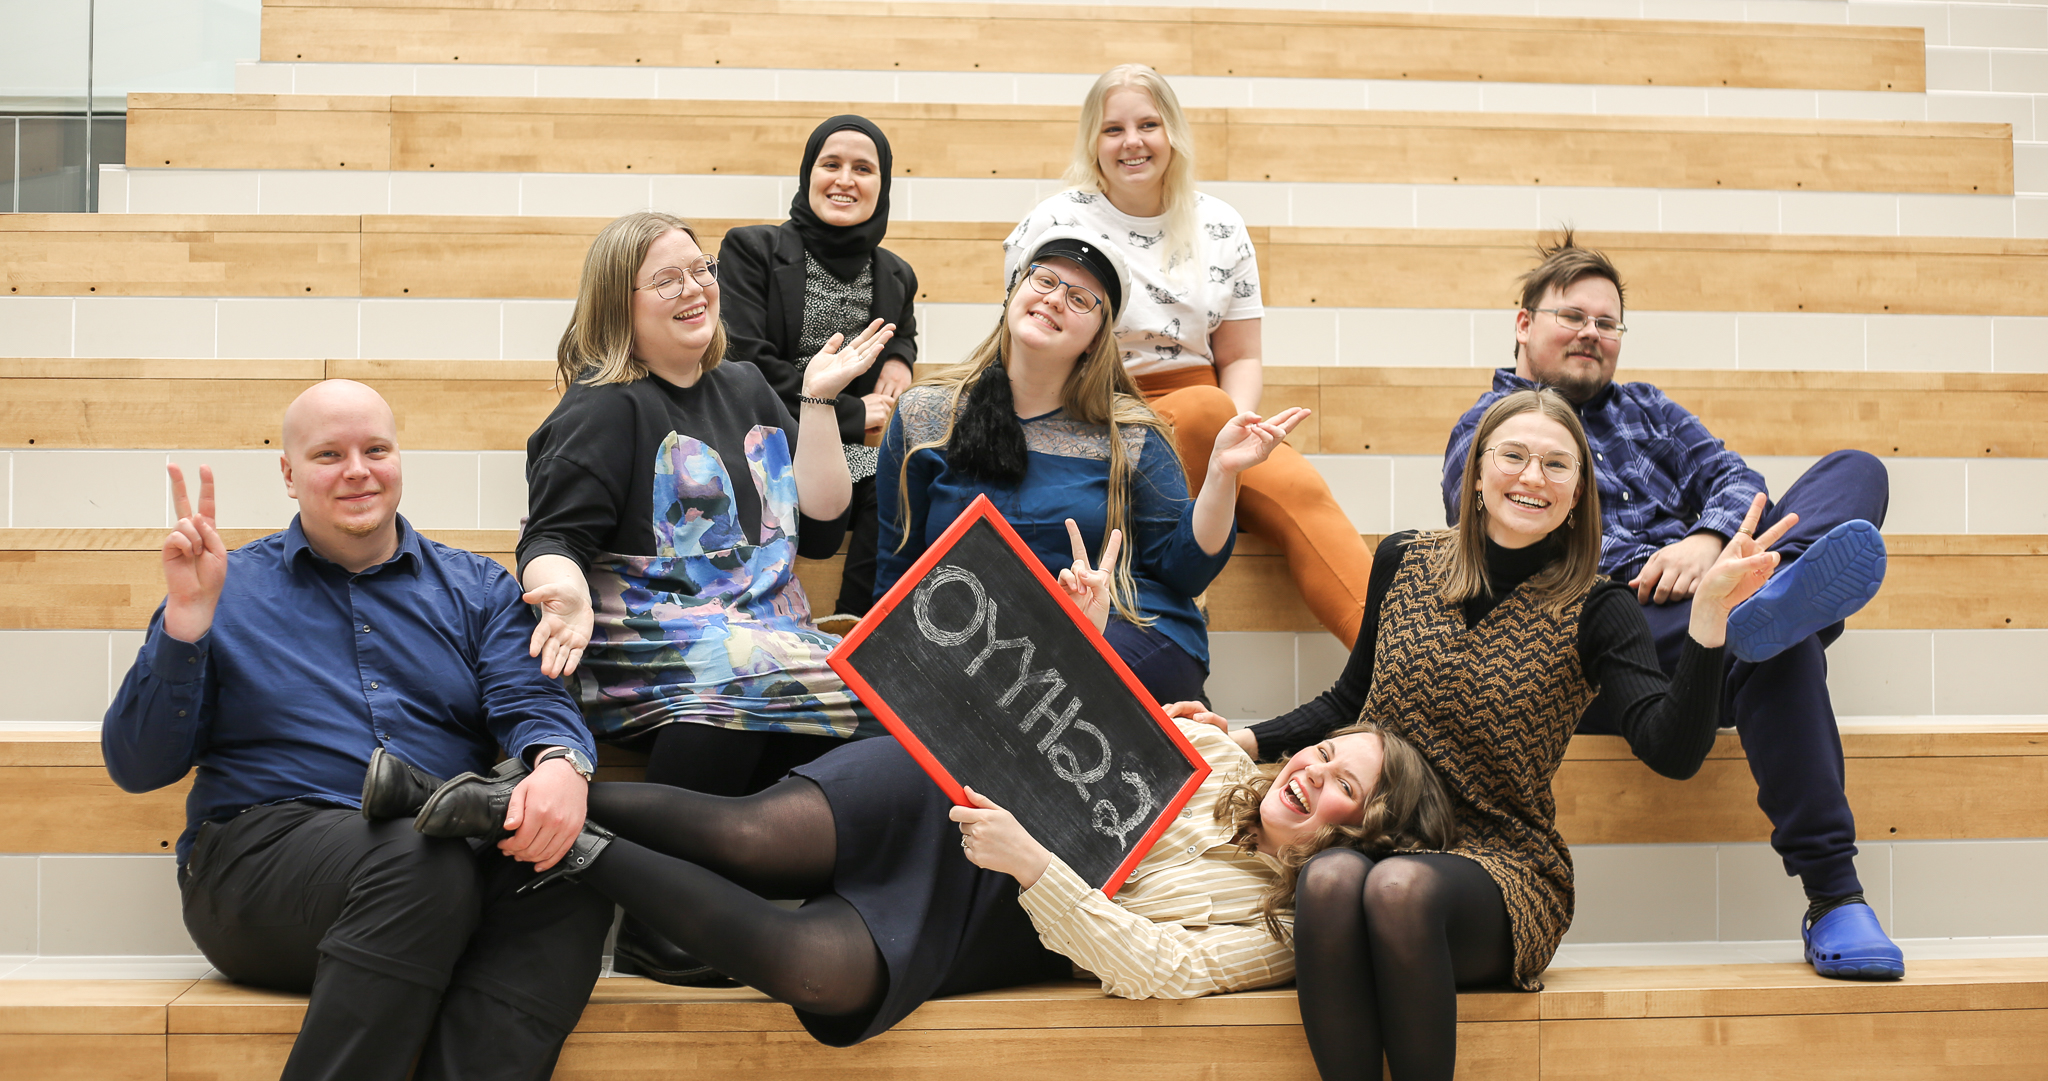 The new Board of the Student Union of the University of Oulu hopes for a communal university